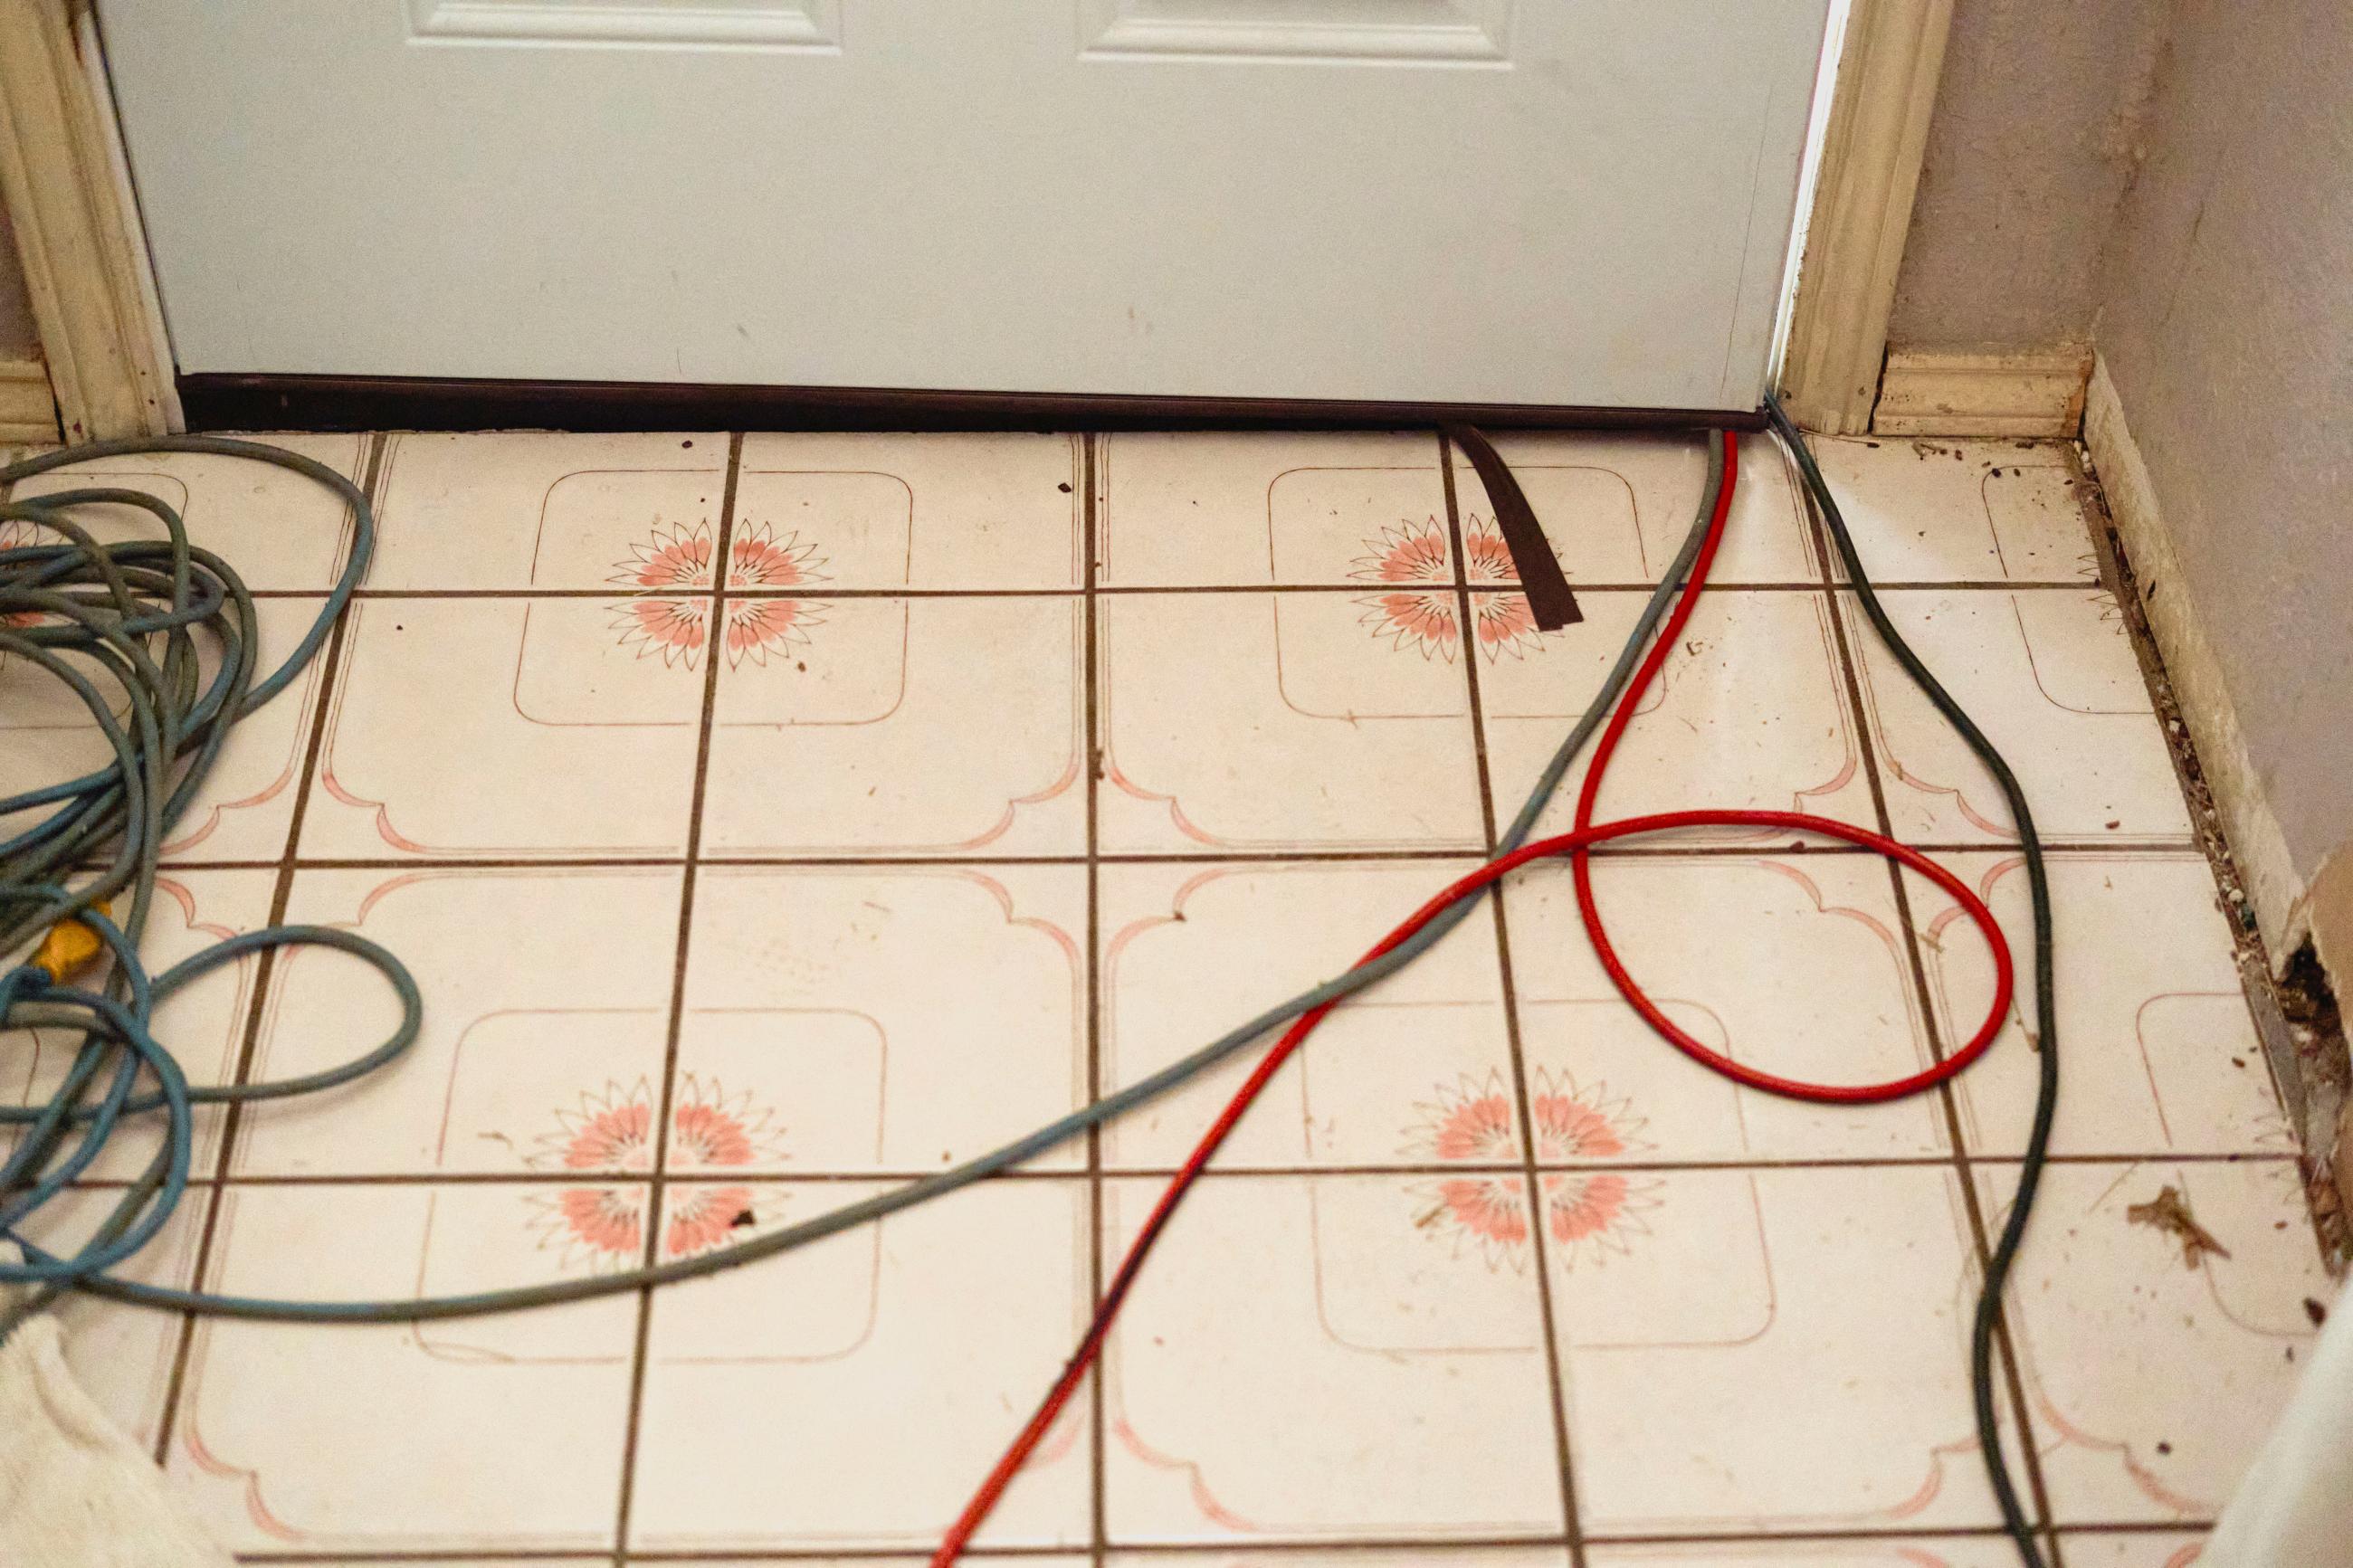 Extension cords run into a house from a portable generator on the porch after winter weather caused electricity blackouts and "boil water" notices in Fort Worth, Texas, U.S., February 20, 2021.